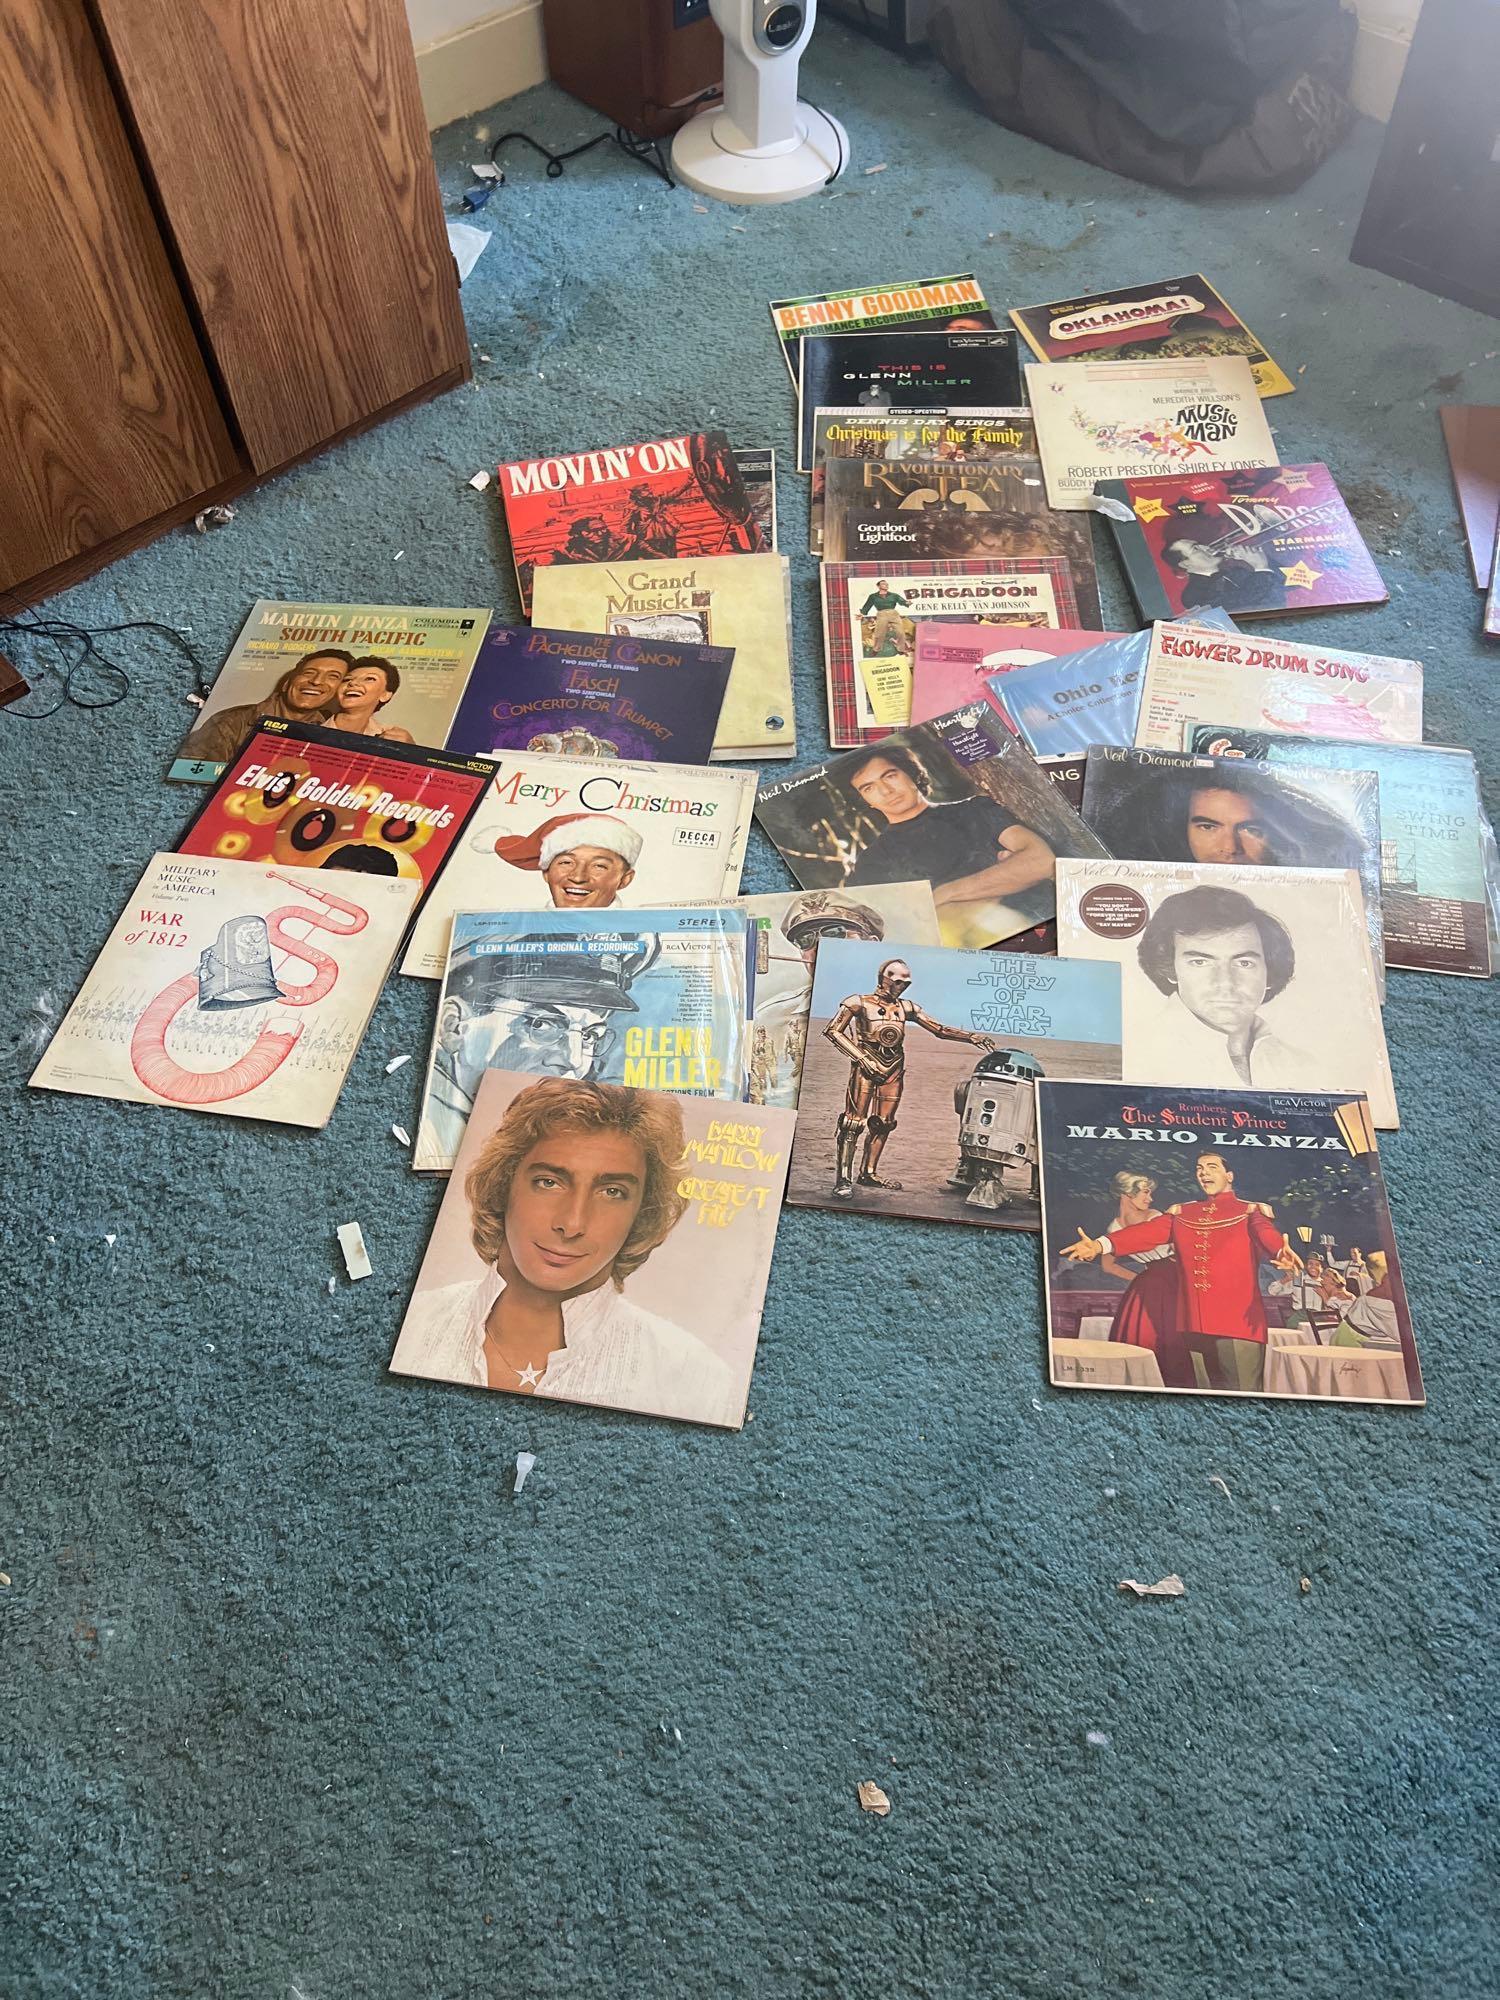 30+ Records lot - upstairs